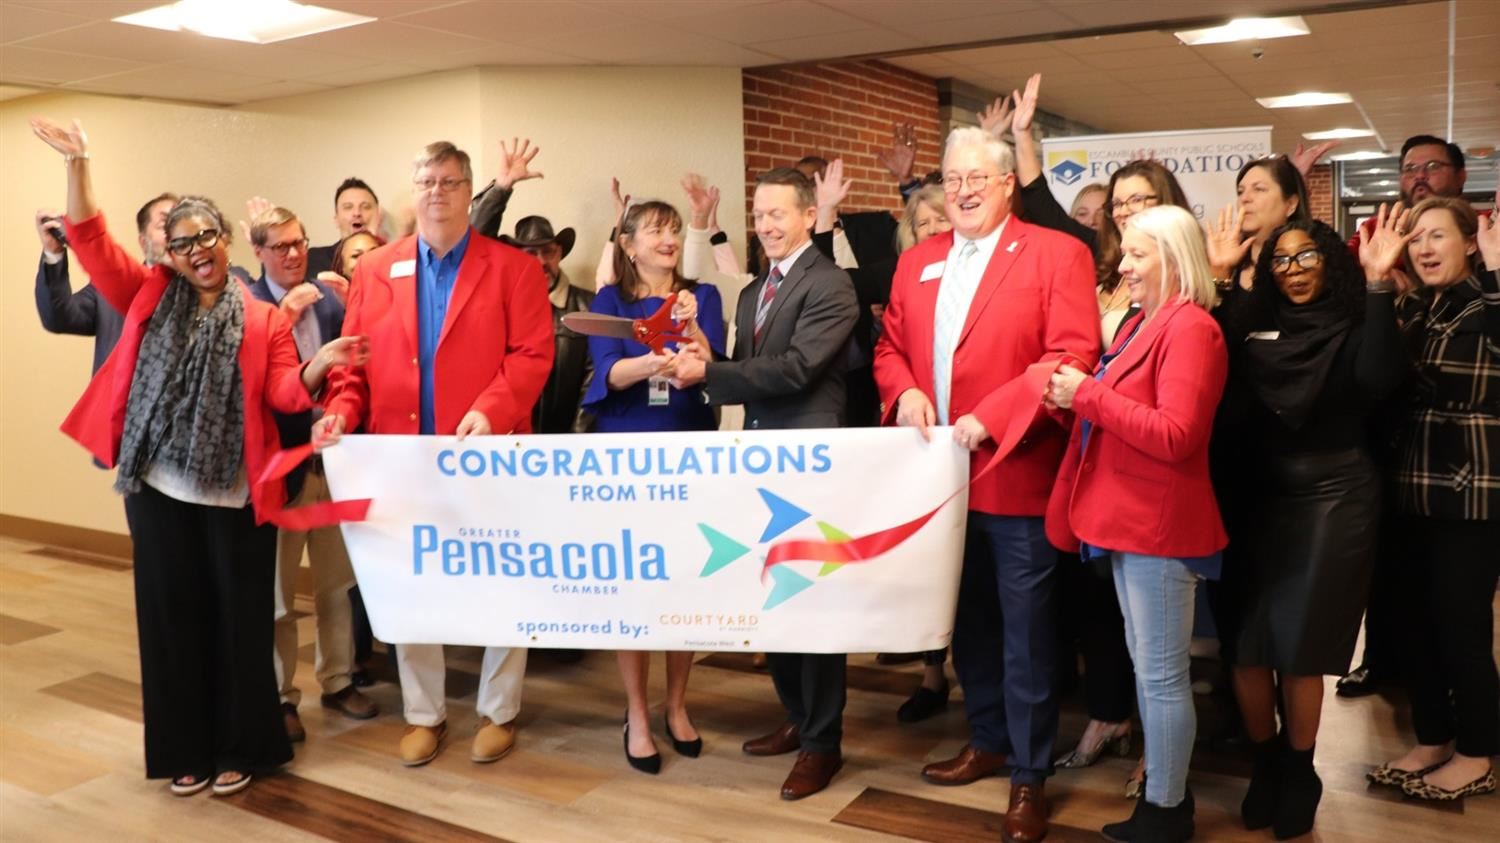 Congratulations from the Greater Pensacola Chamber